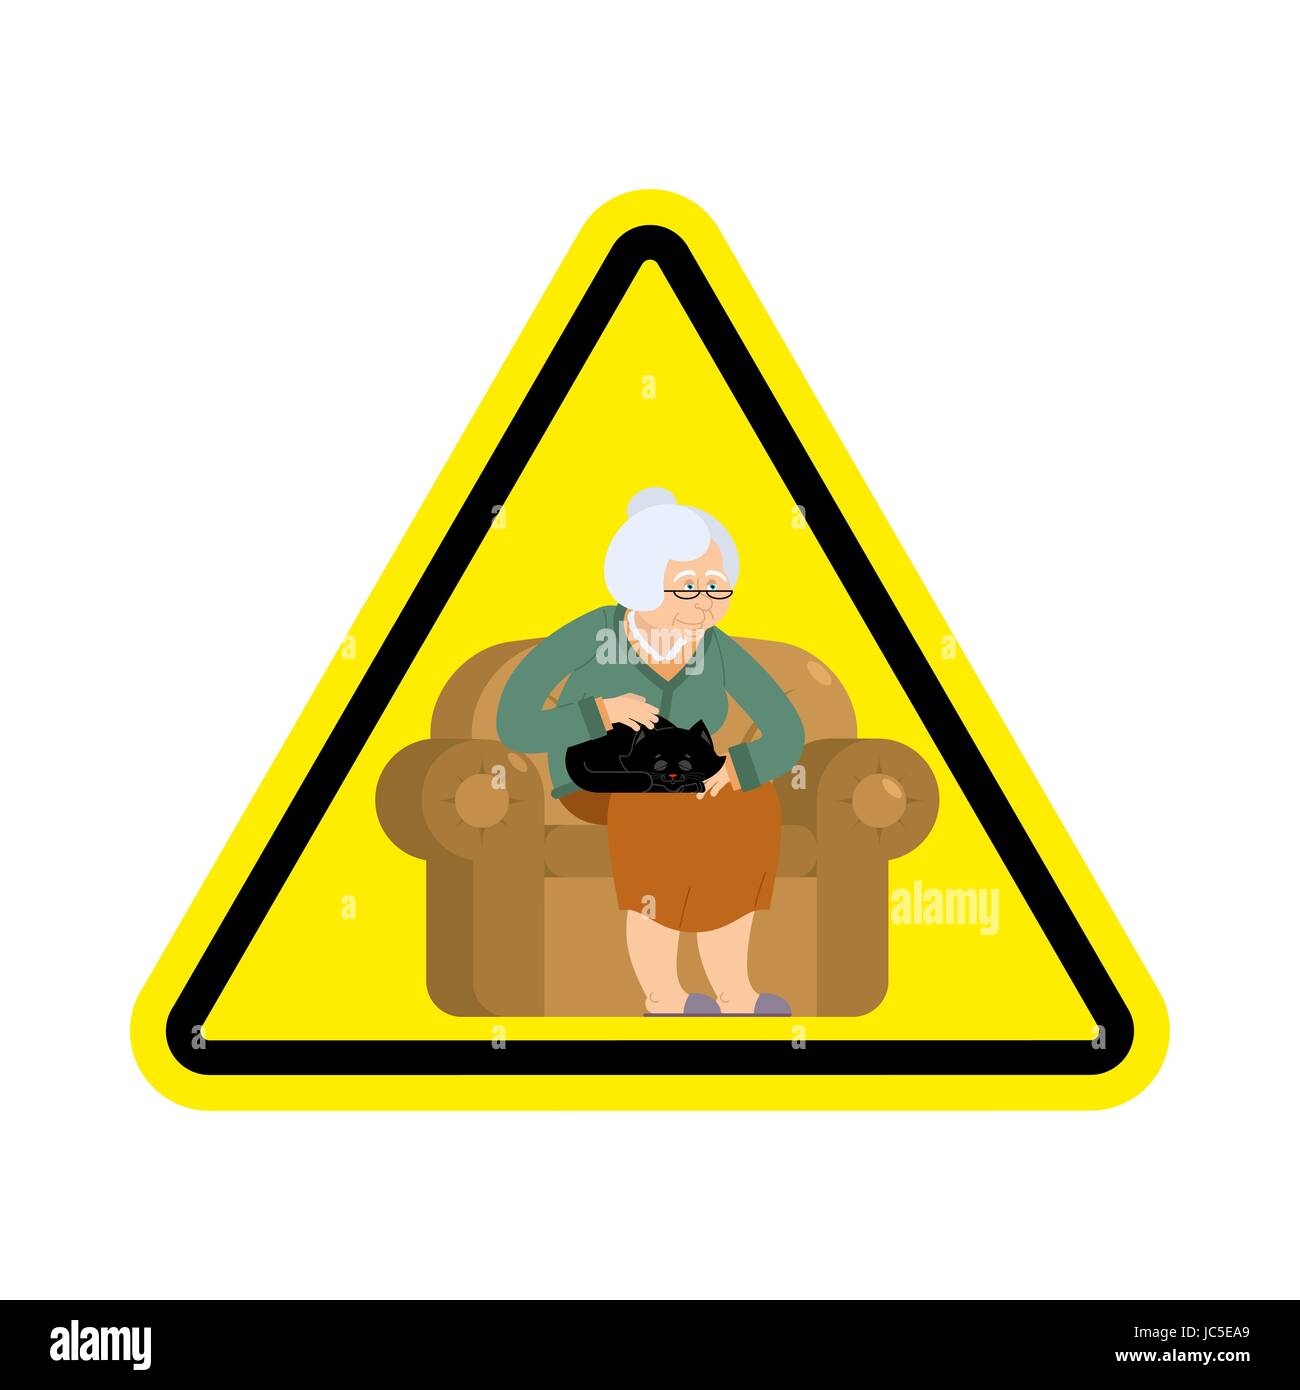 Attention grandmother. Caution old woman and cat. Yellow triangle road sign Stock Vector